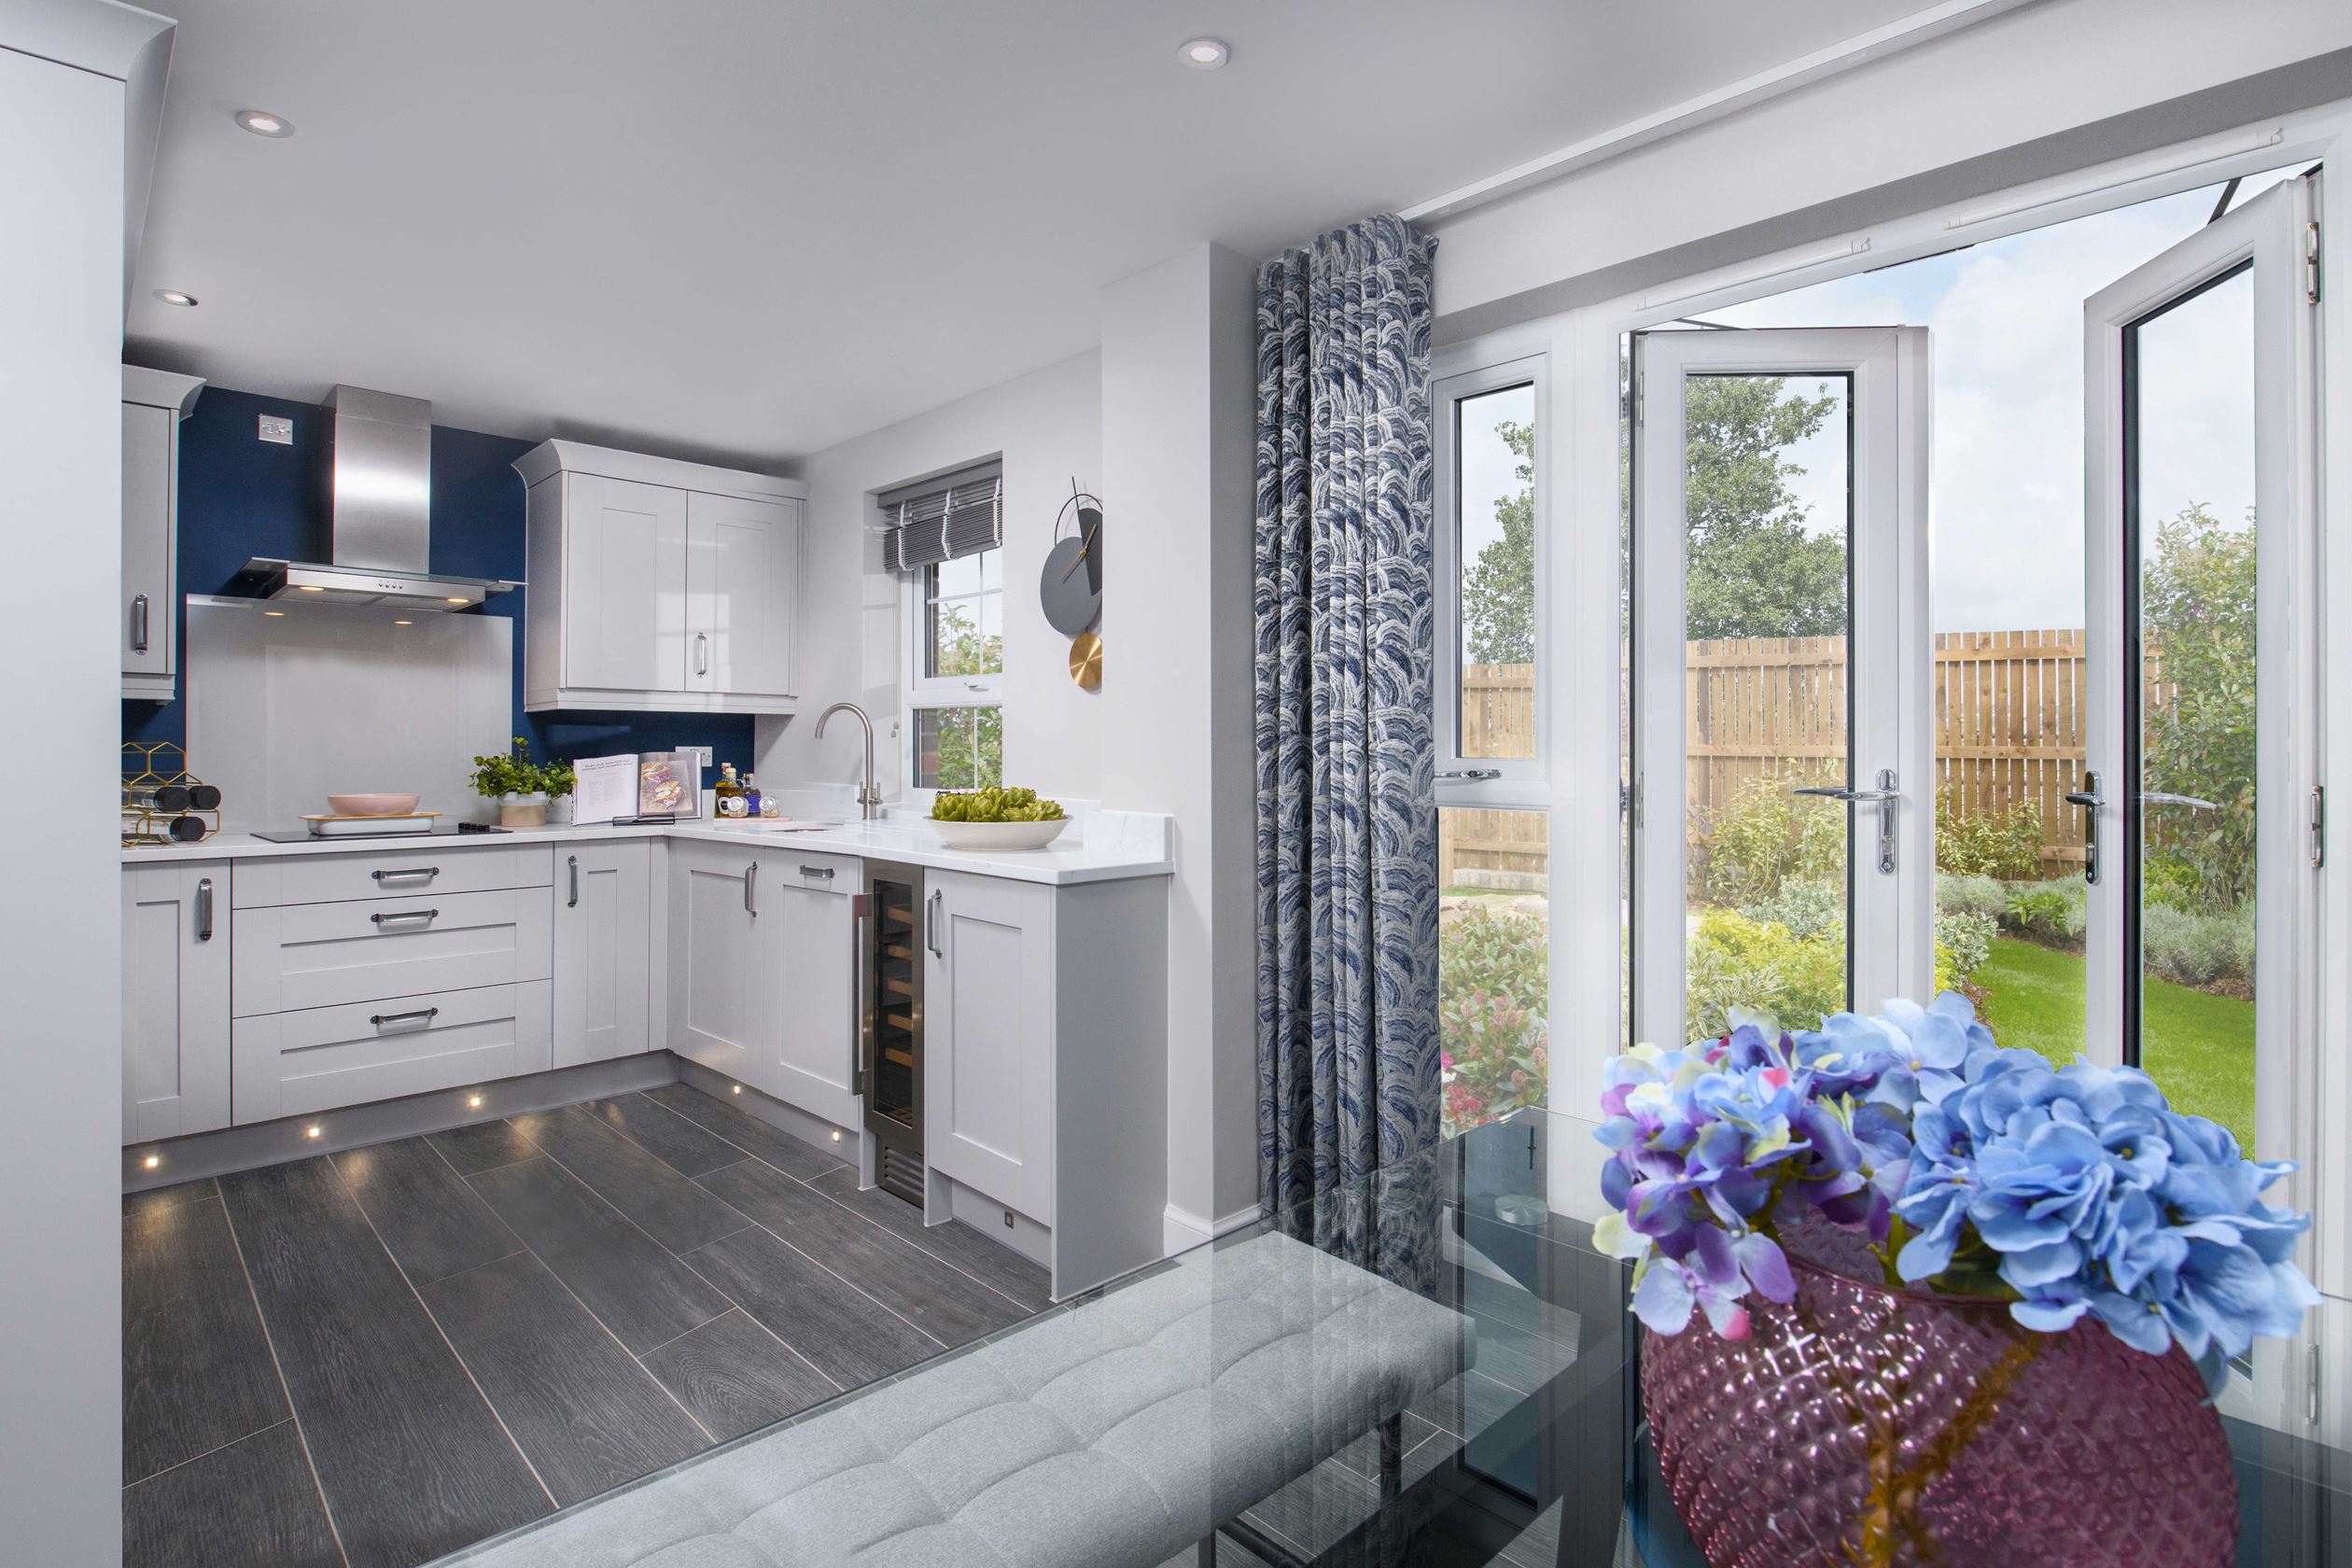 Property 3 of 10. Ripon Show Home Kitchen With French Doors